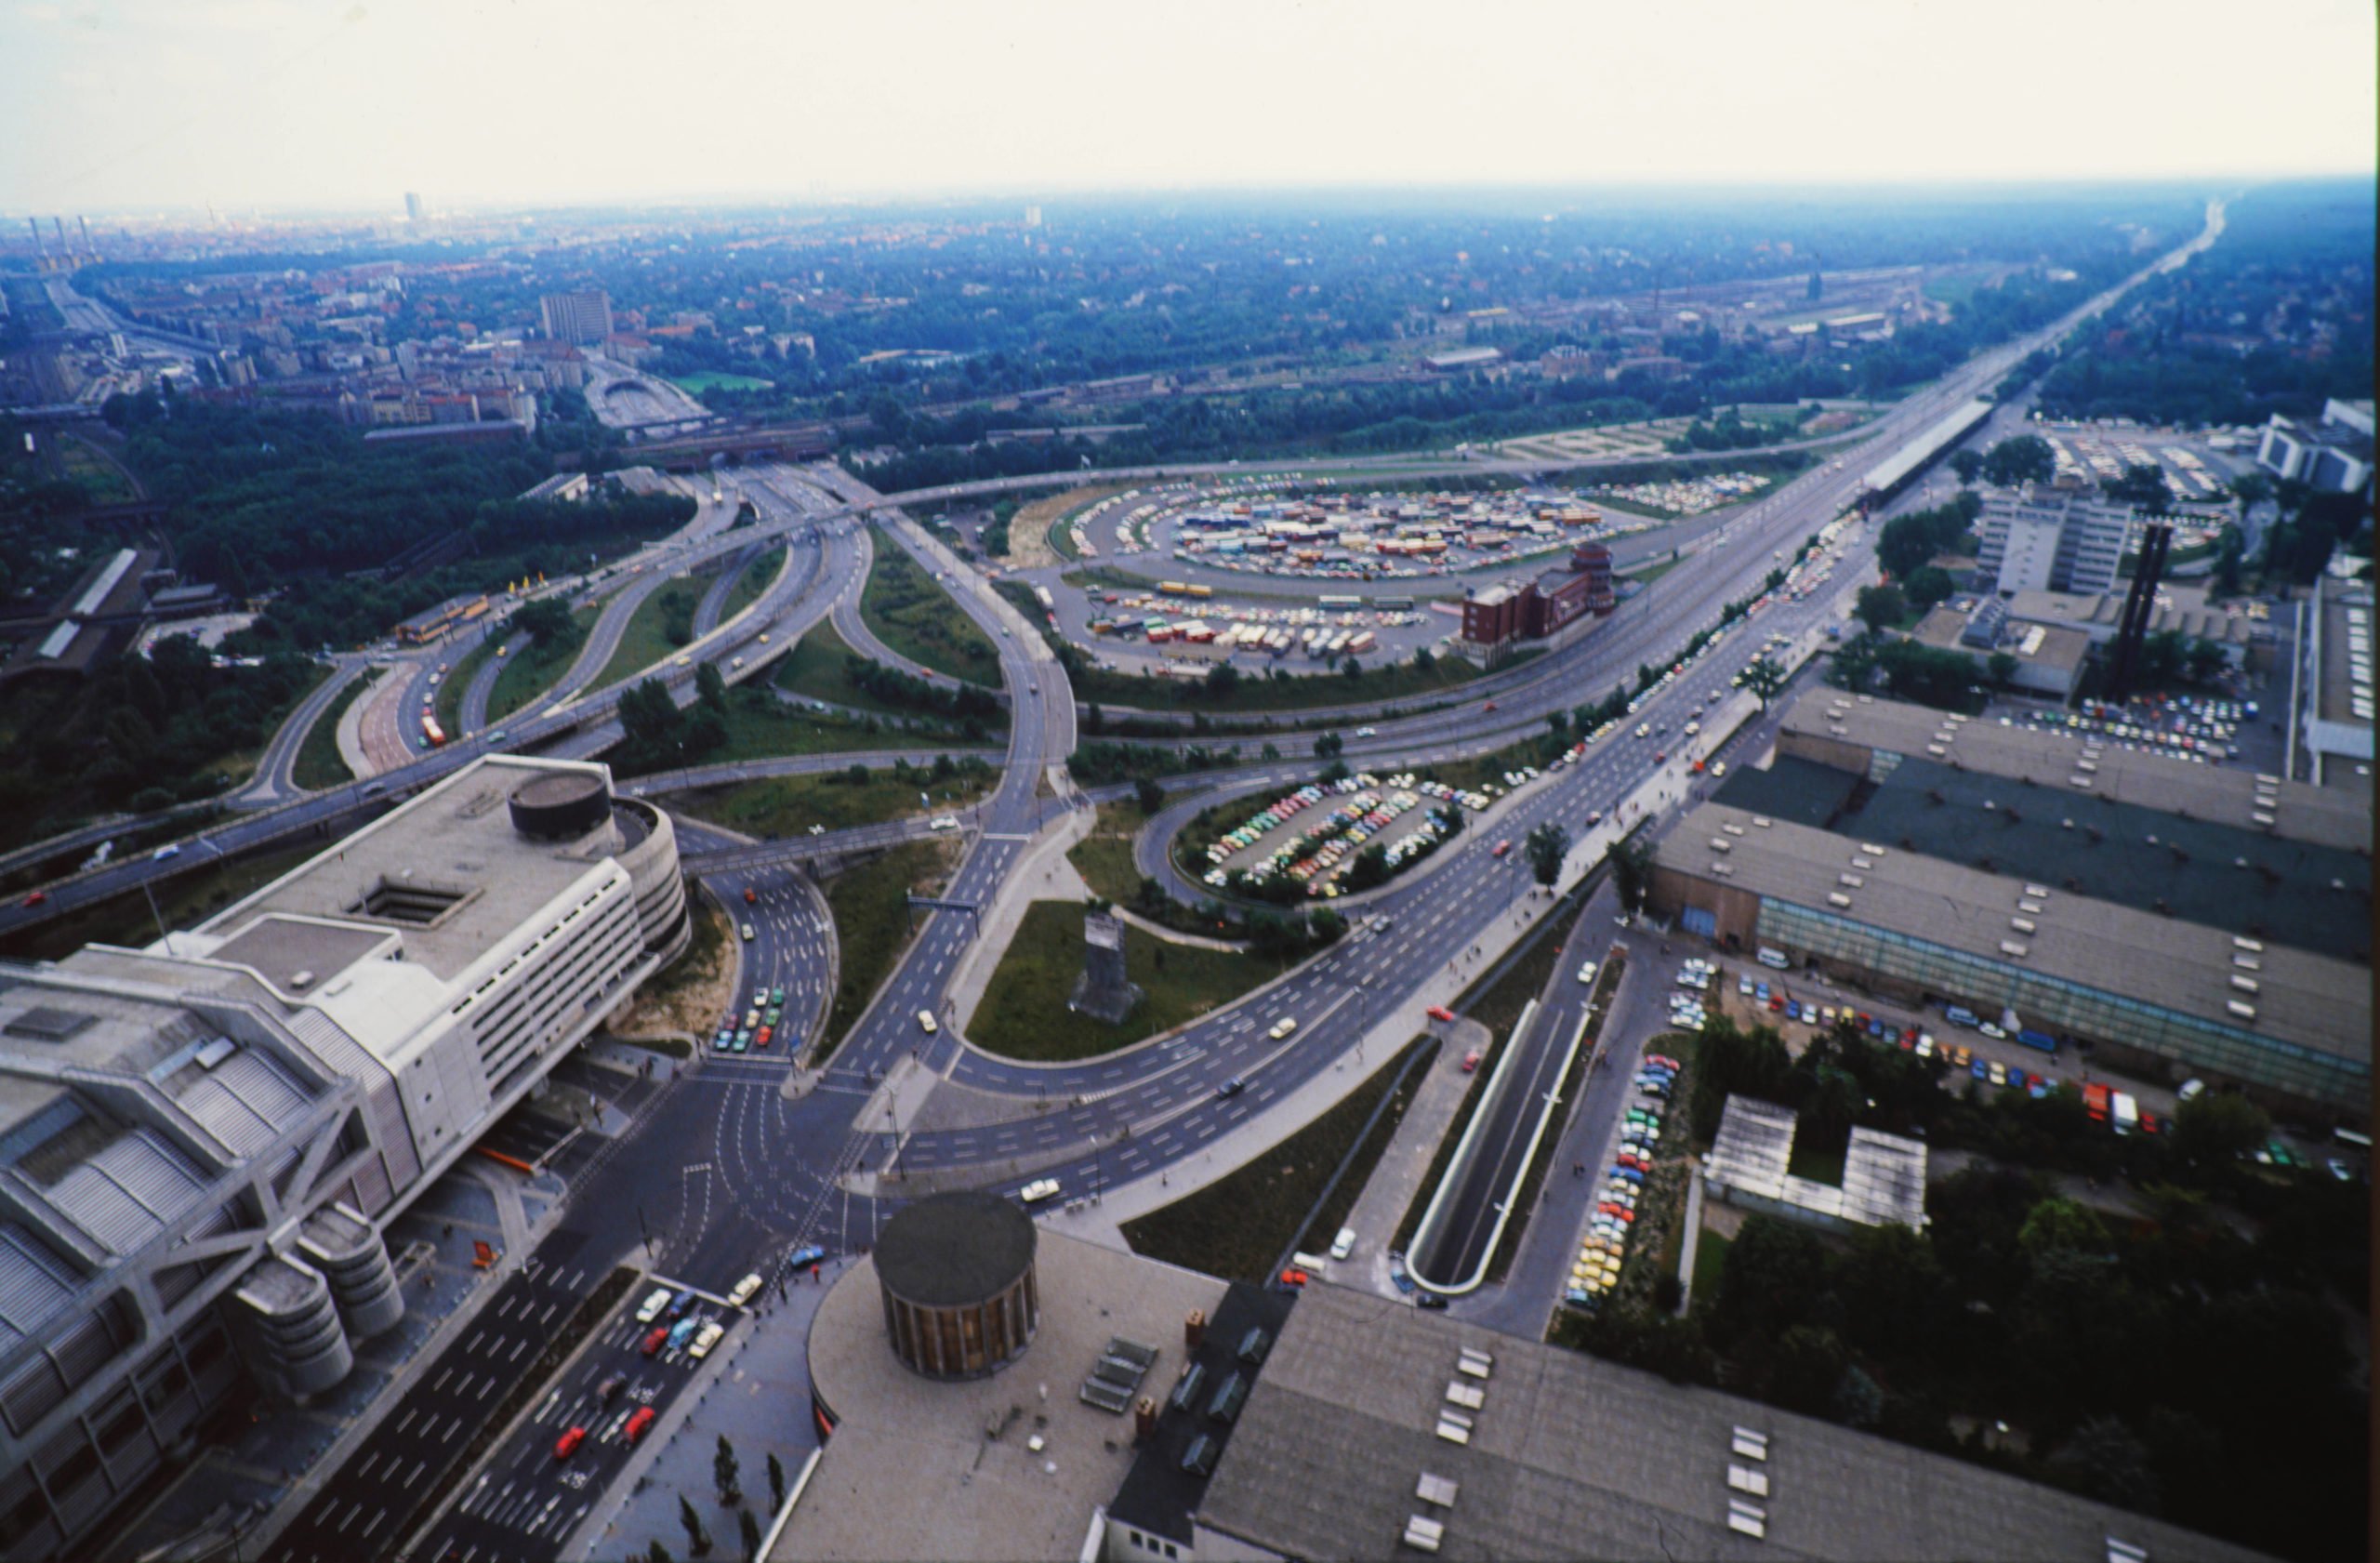 View of the A100 and ICC from the north, around 1976. Photo: Imago/Serienlicht